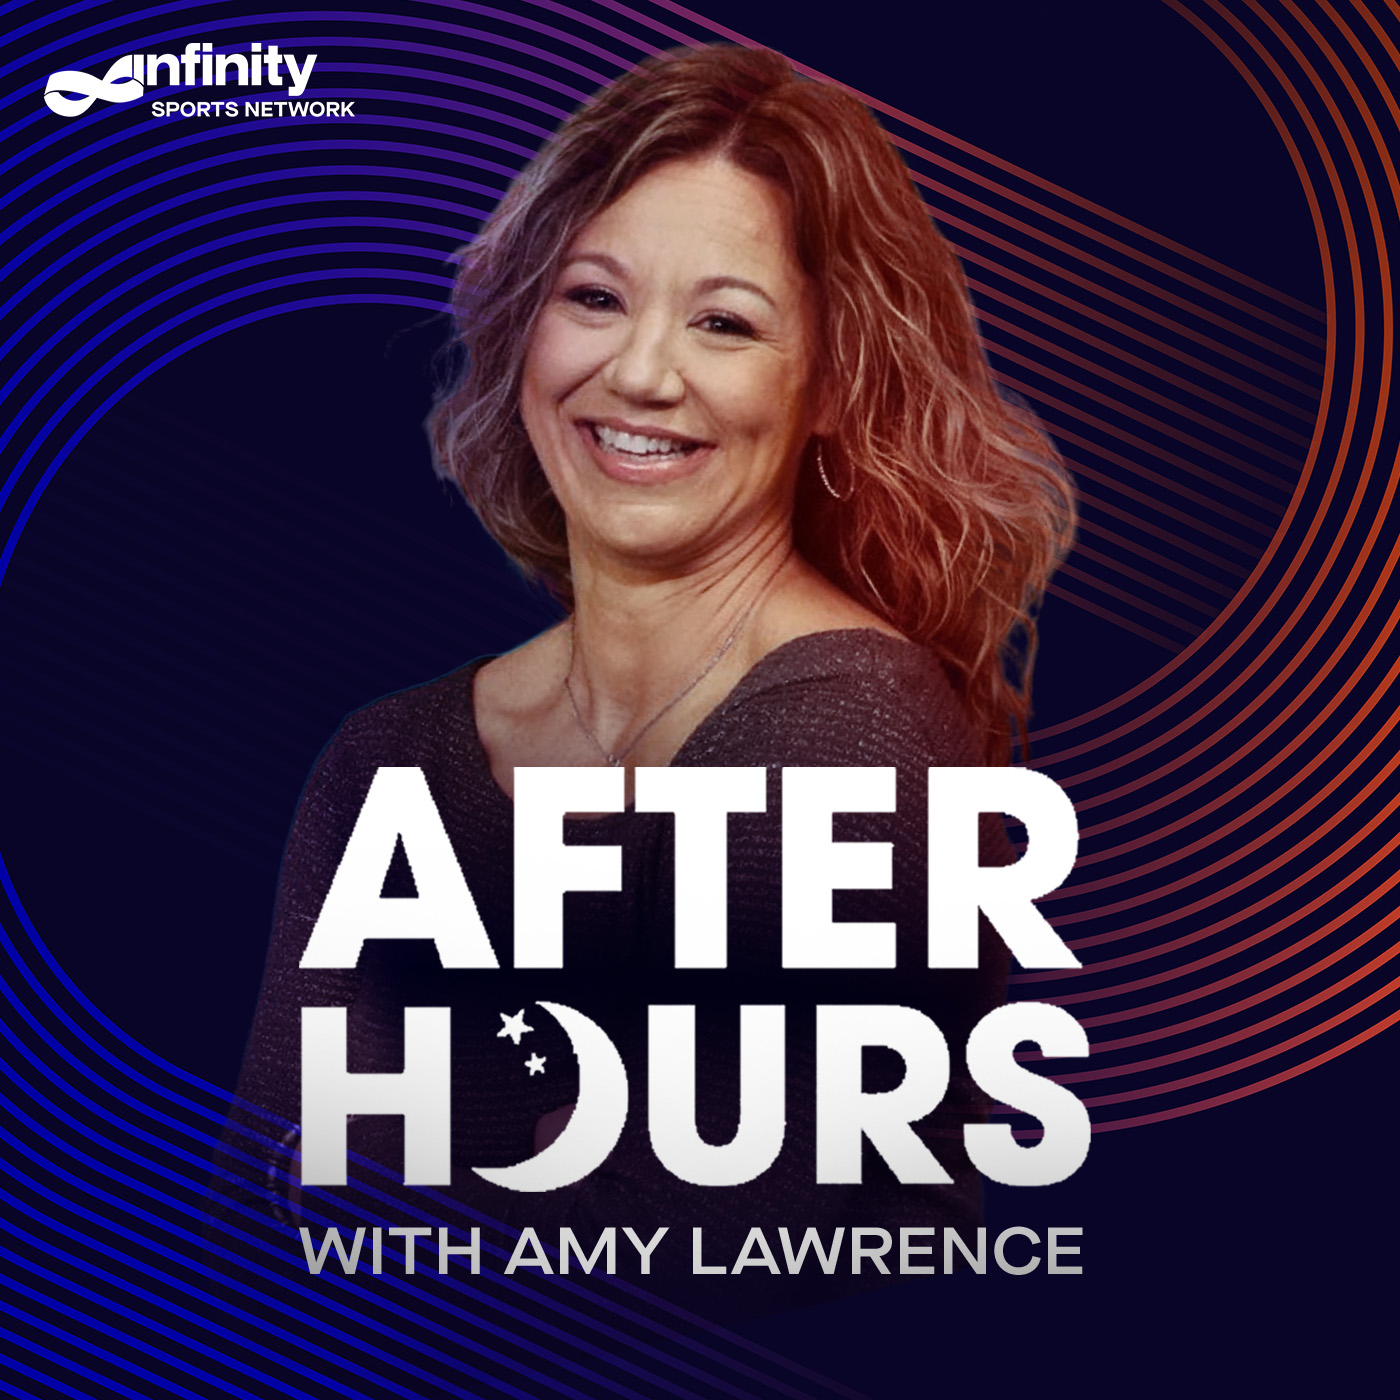 11-4-21 After Hours with Amy Lawrence PODCAST: Hour 1